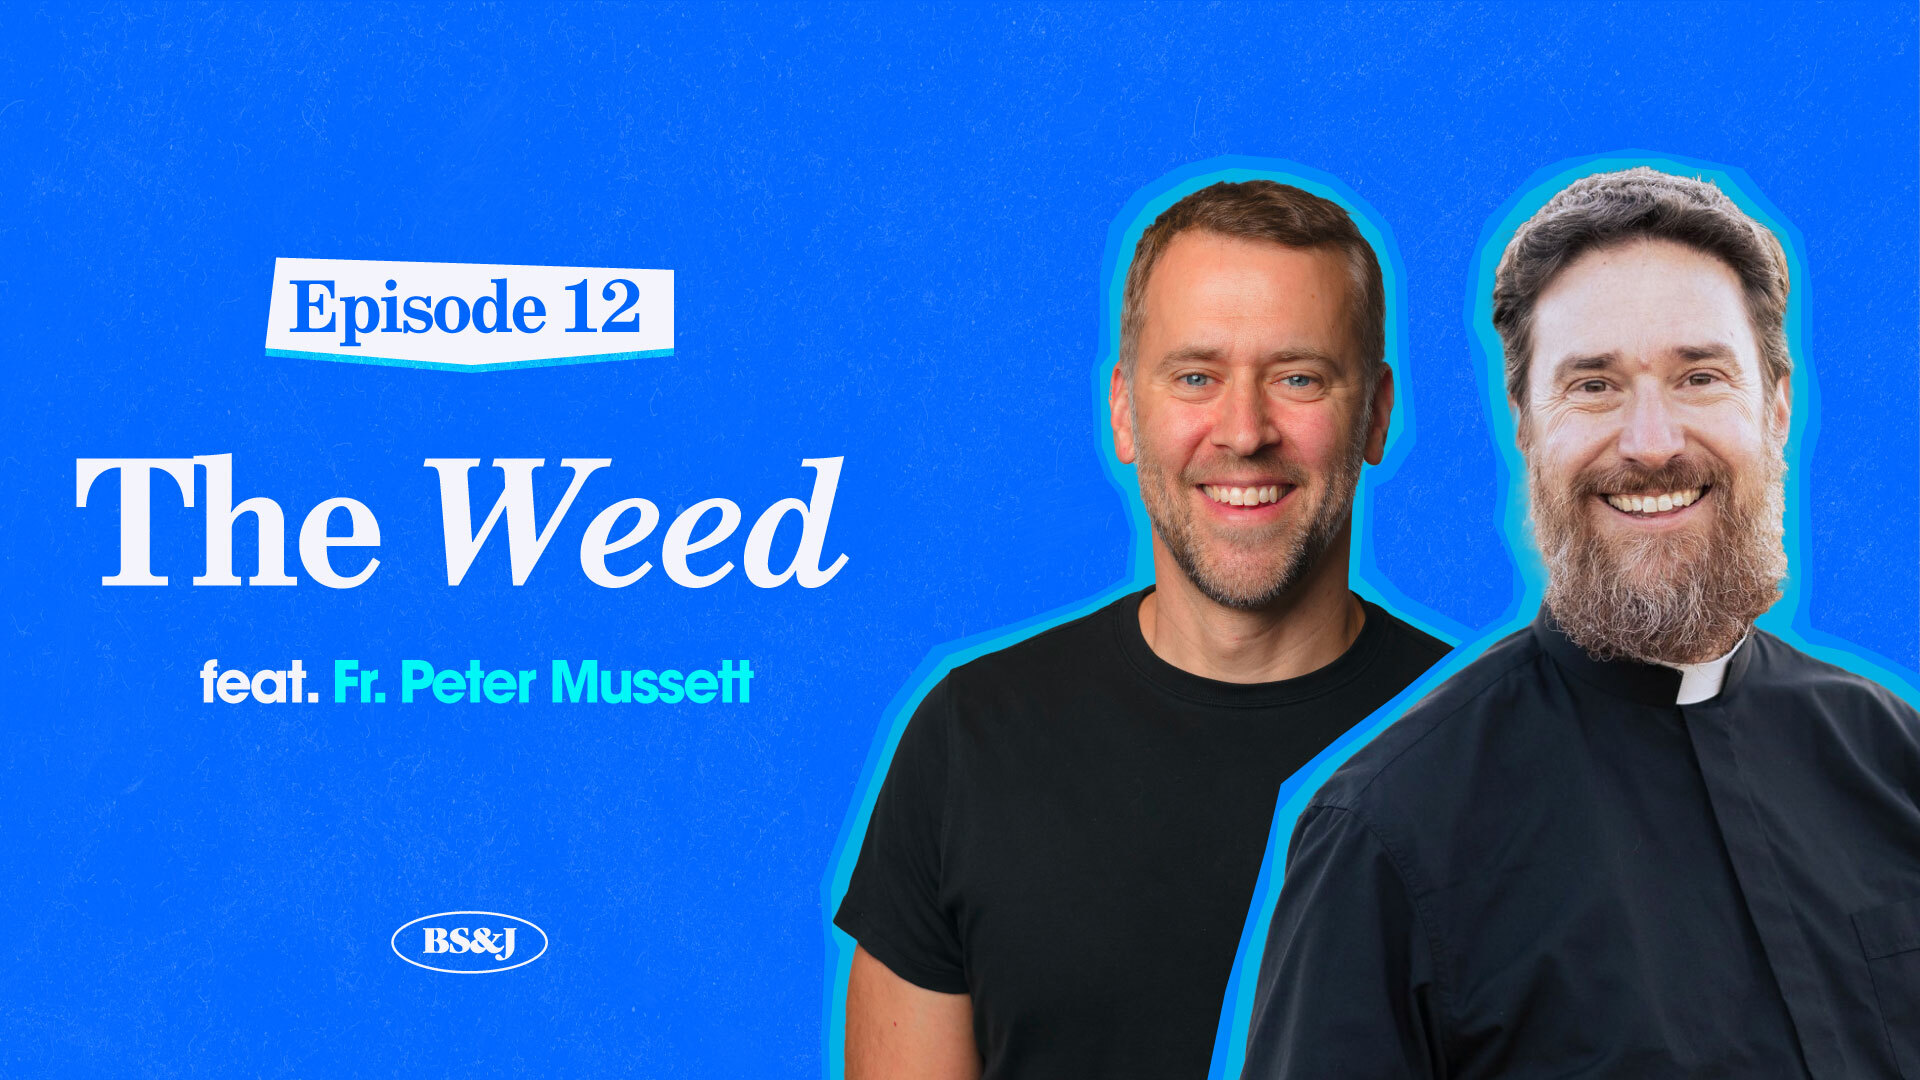 Episode 12 – The Weed with Fr. Peter Mussett